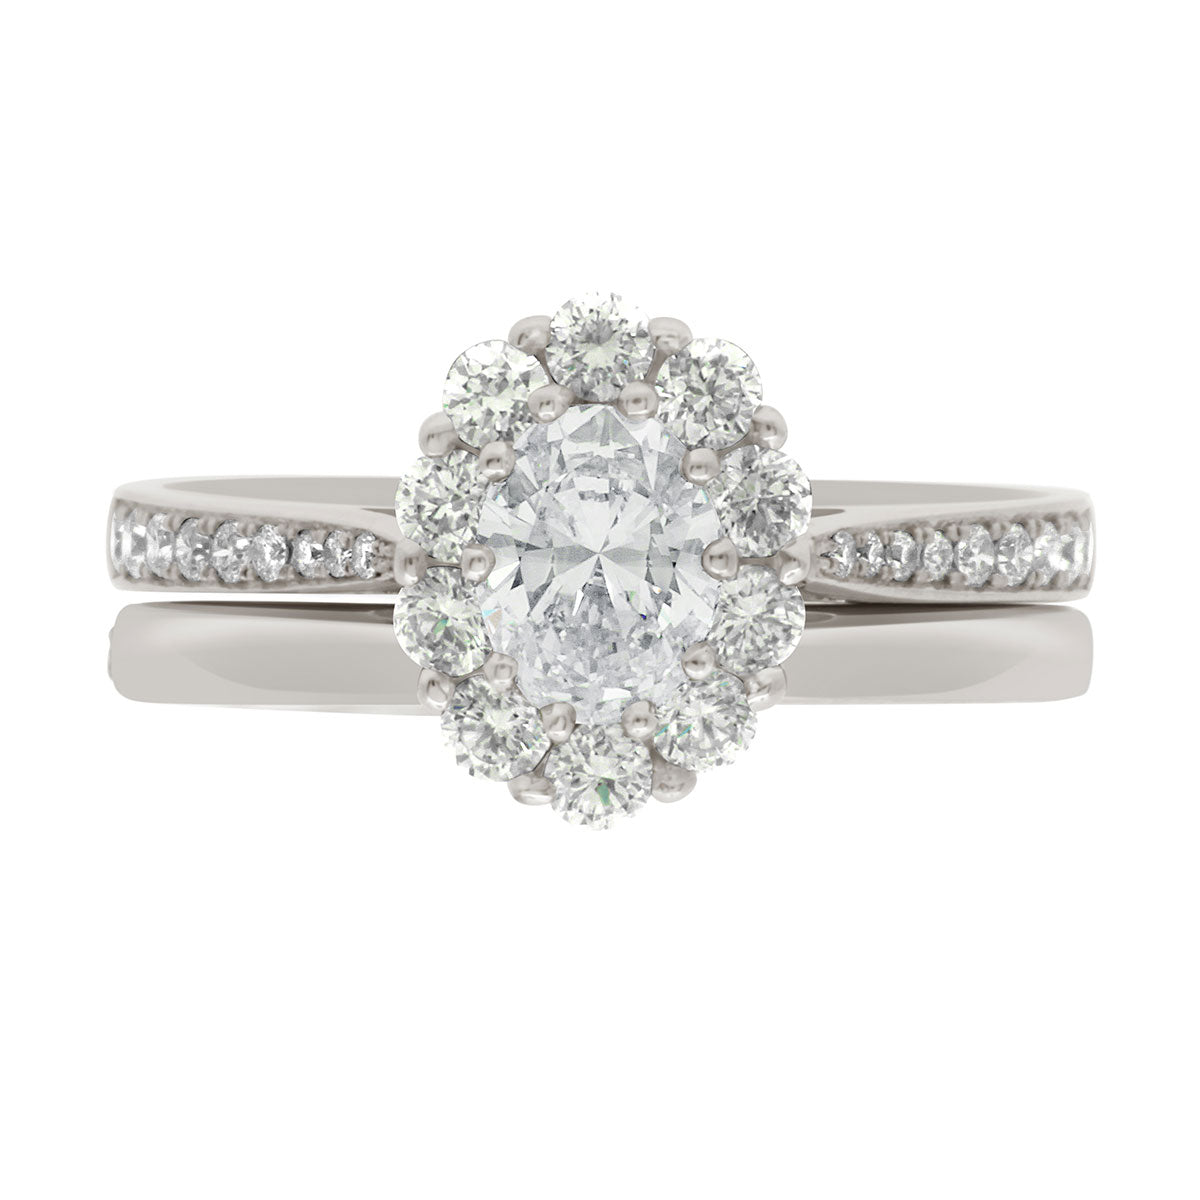 Cluster Engagement Ring with diamond shoulders in white gold with a matching solid white gold wedding ring